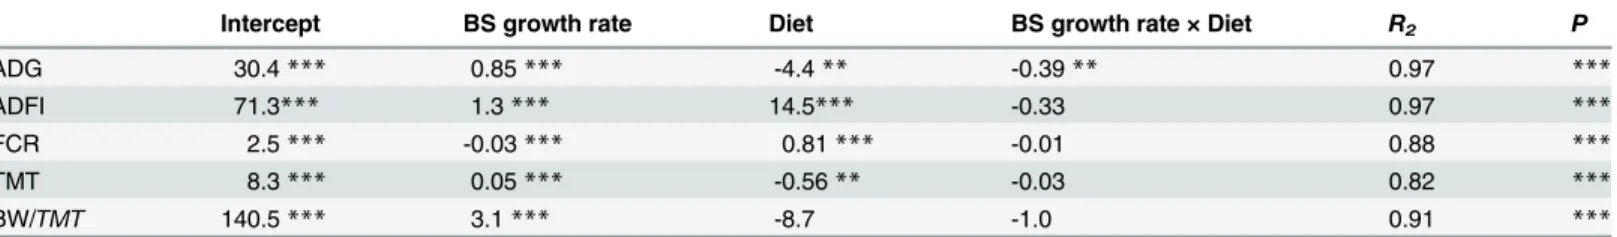 Table 2. The linear regression between both factors (BS growth rate and diet) and ADG, ADFI, FCR, TMT and BW/ TMT.